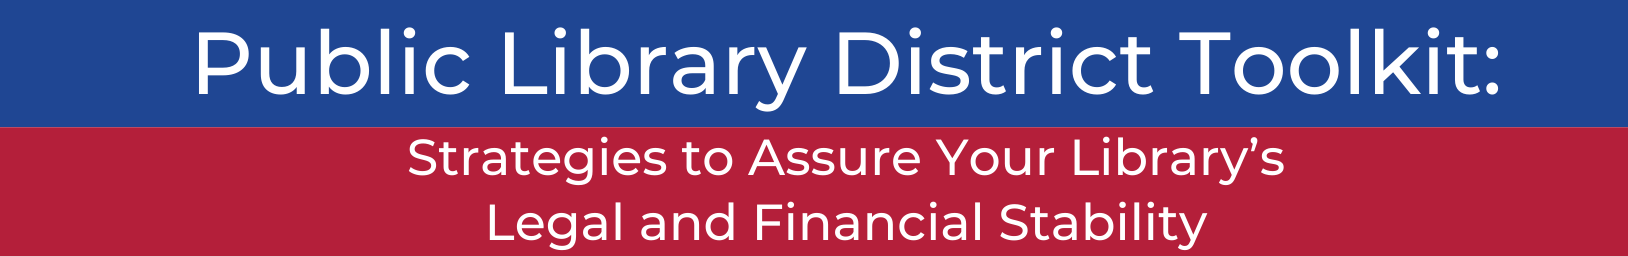 Public Library District Toolkit: Strategies to Assure your Library’s Legal and Financial Stability